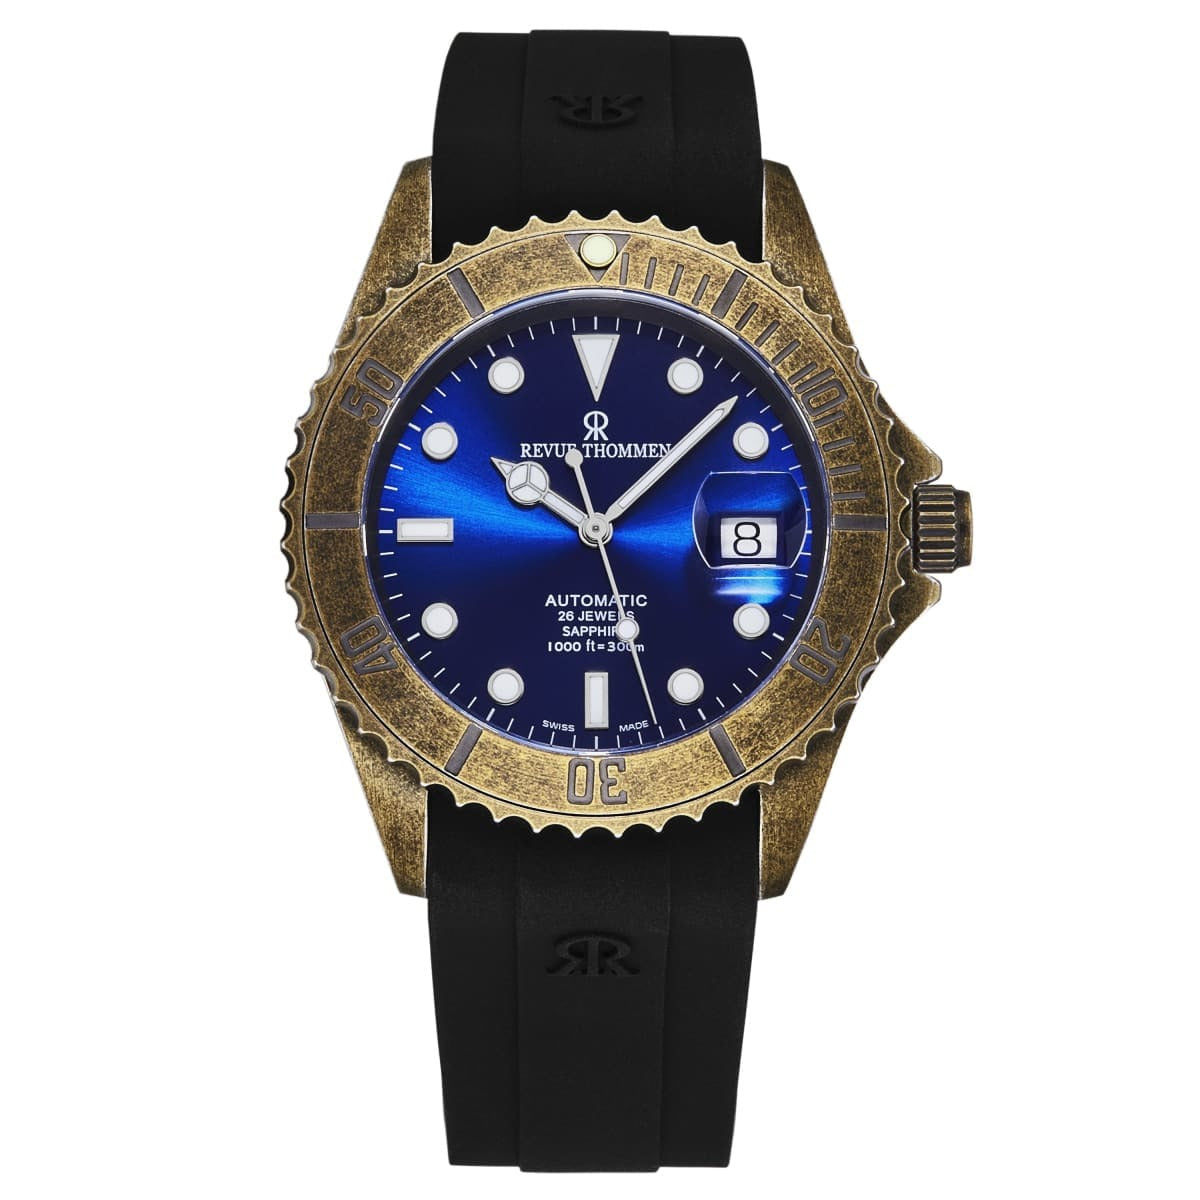 An Revue Thommen Men's 'Diver' Blue Dial Black Rubber Gunmetal Automatic Watch 17571.2885 with a blue dial and black strap.